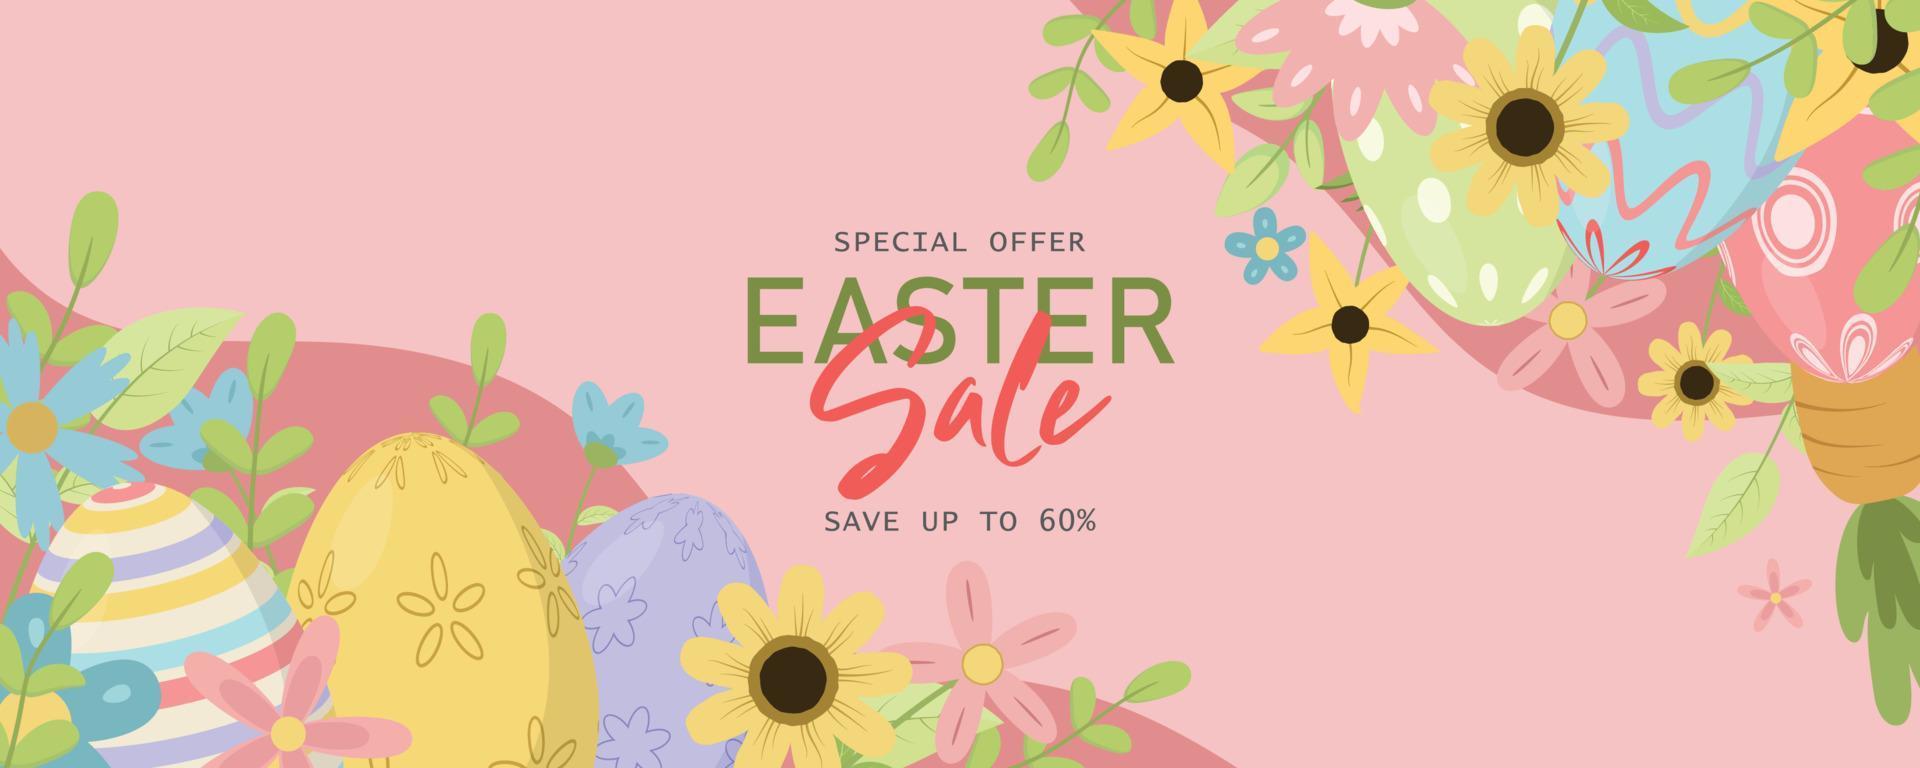 Easter sale horizontal banner template vector